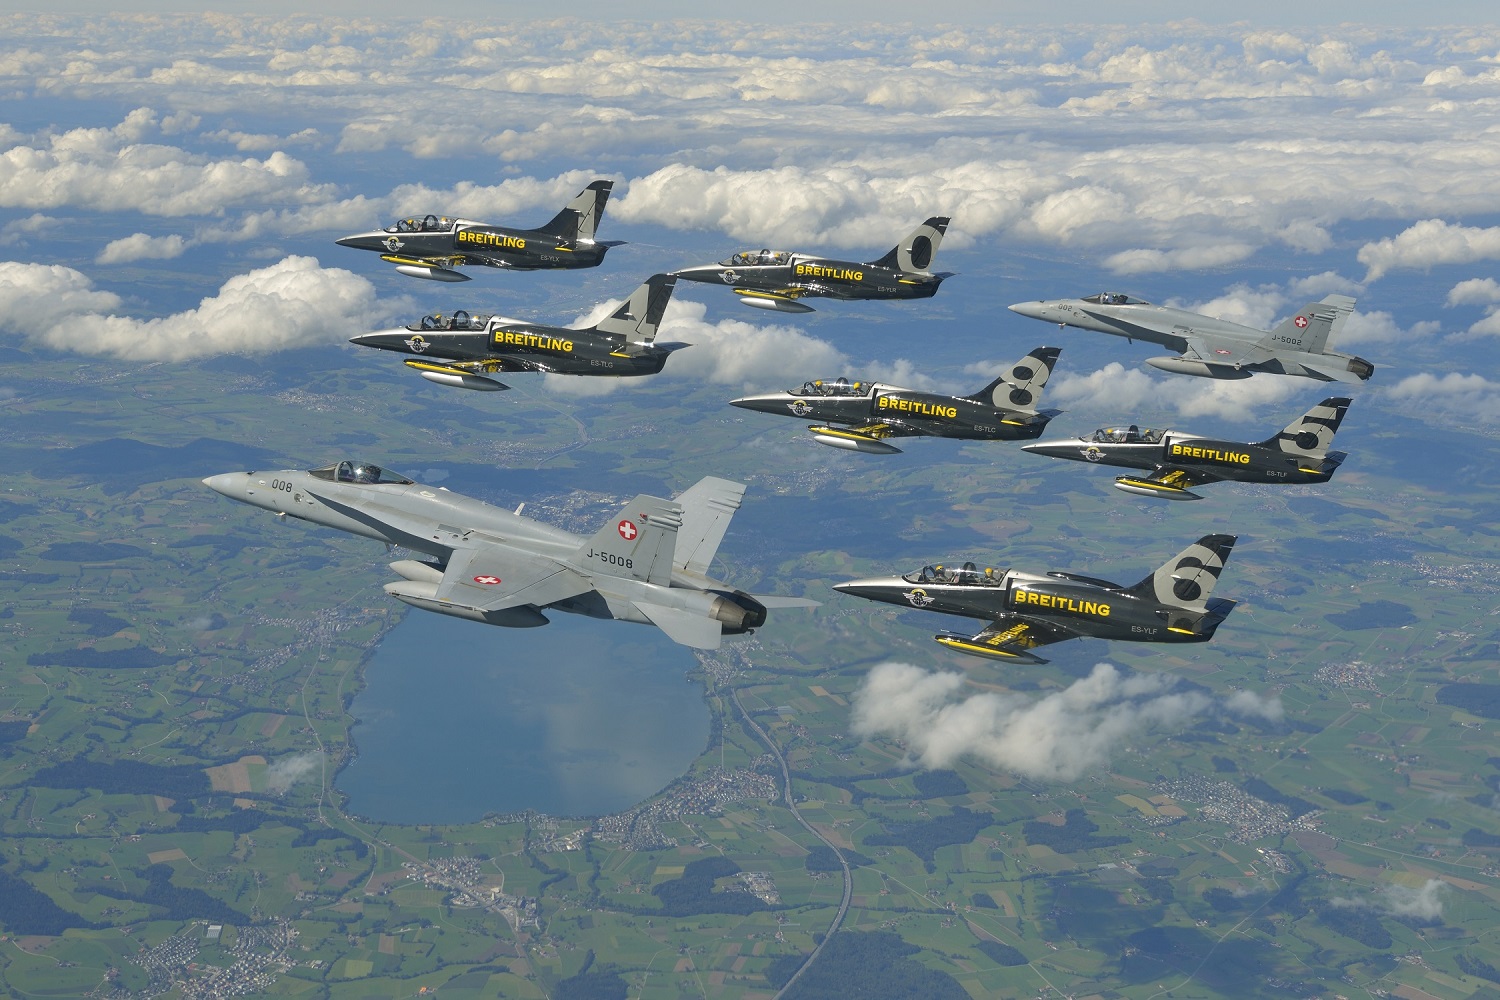 Breitling Jet Team with Swiss Air Force F/A-18 ( Image Credit Breitling SA).